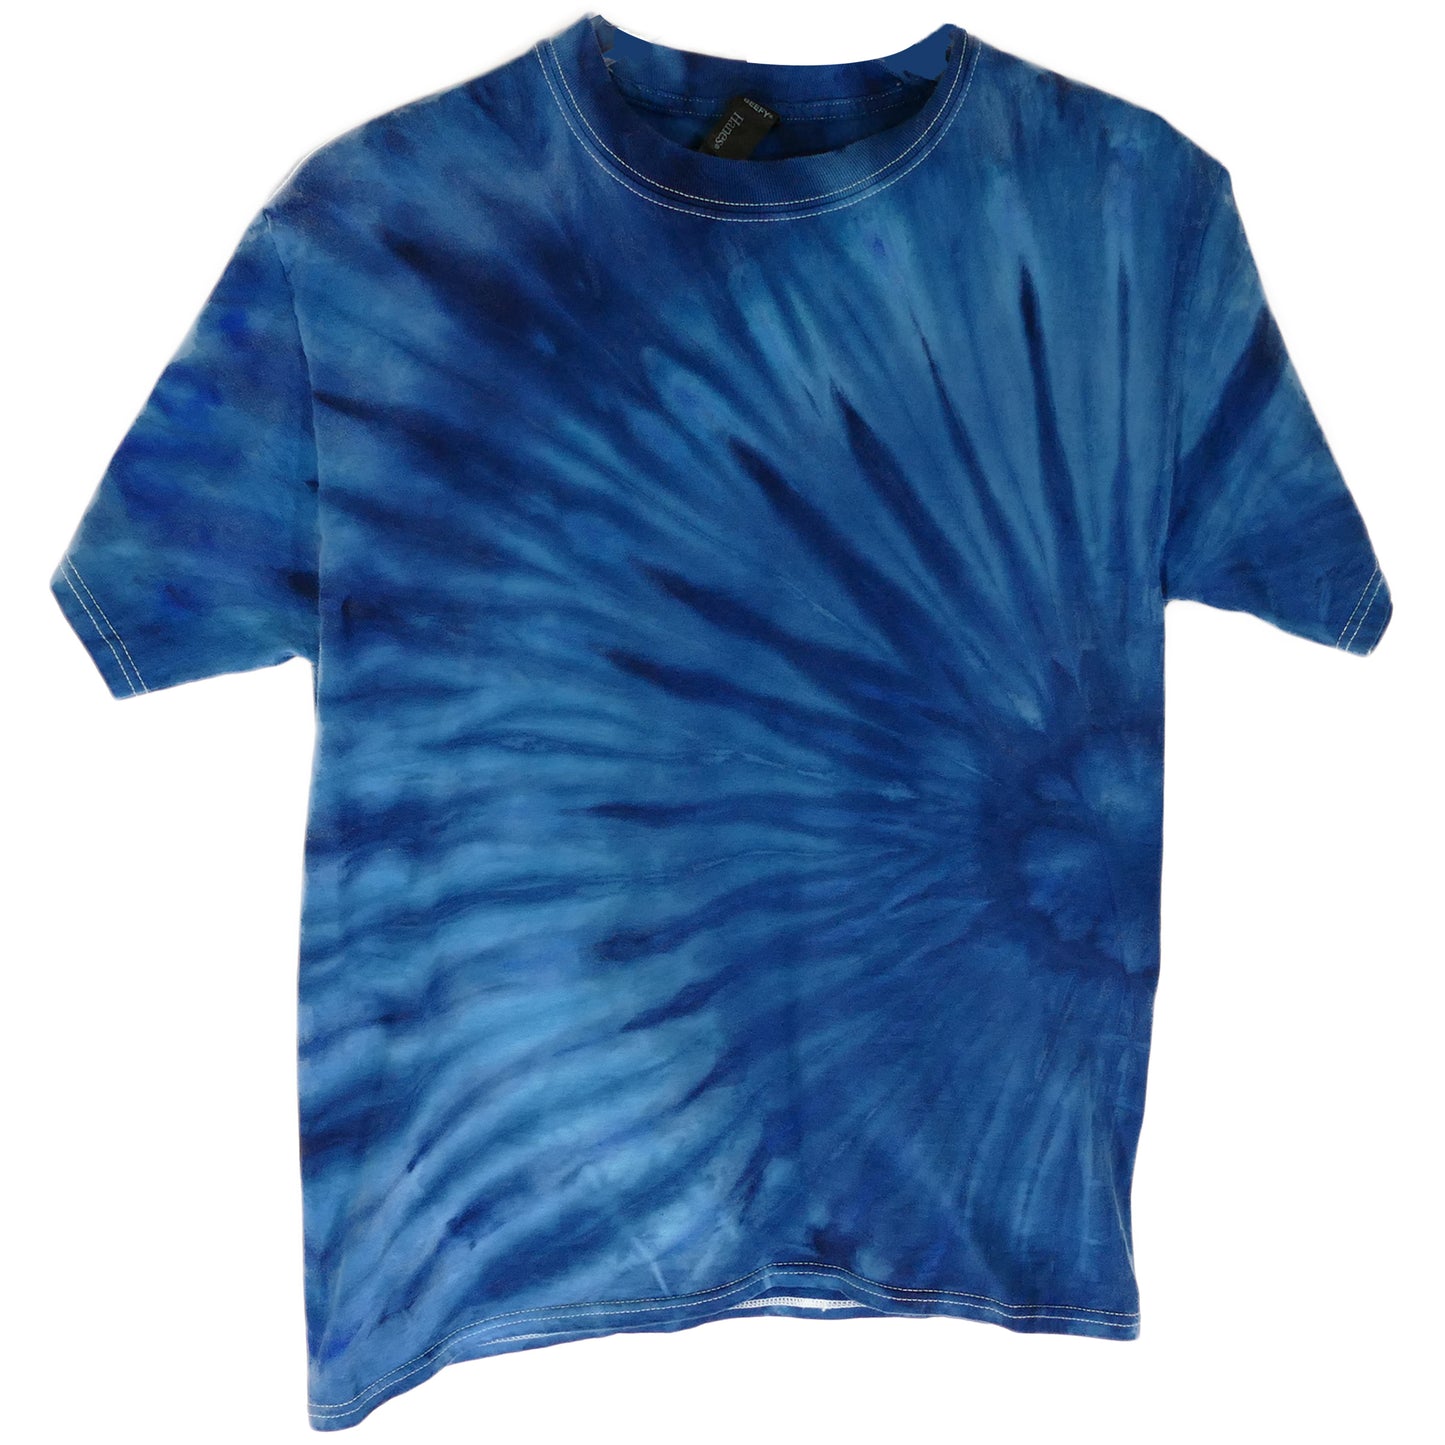 Blue Side Design Tee size Medium by request